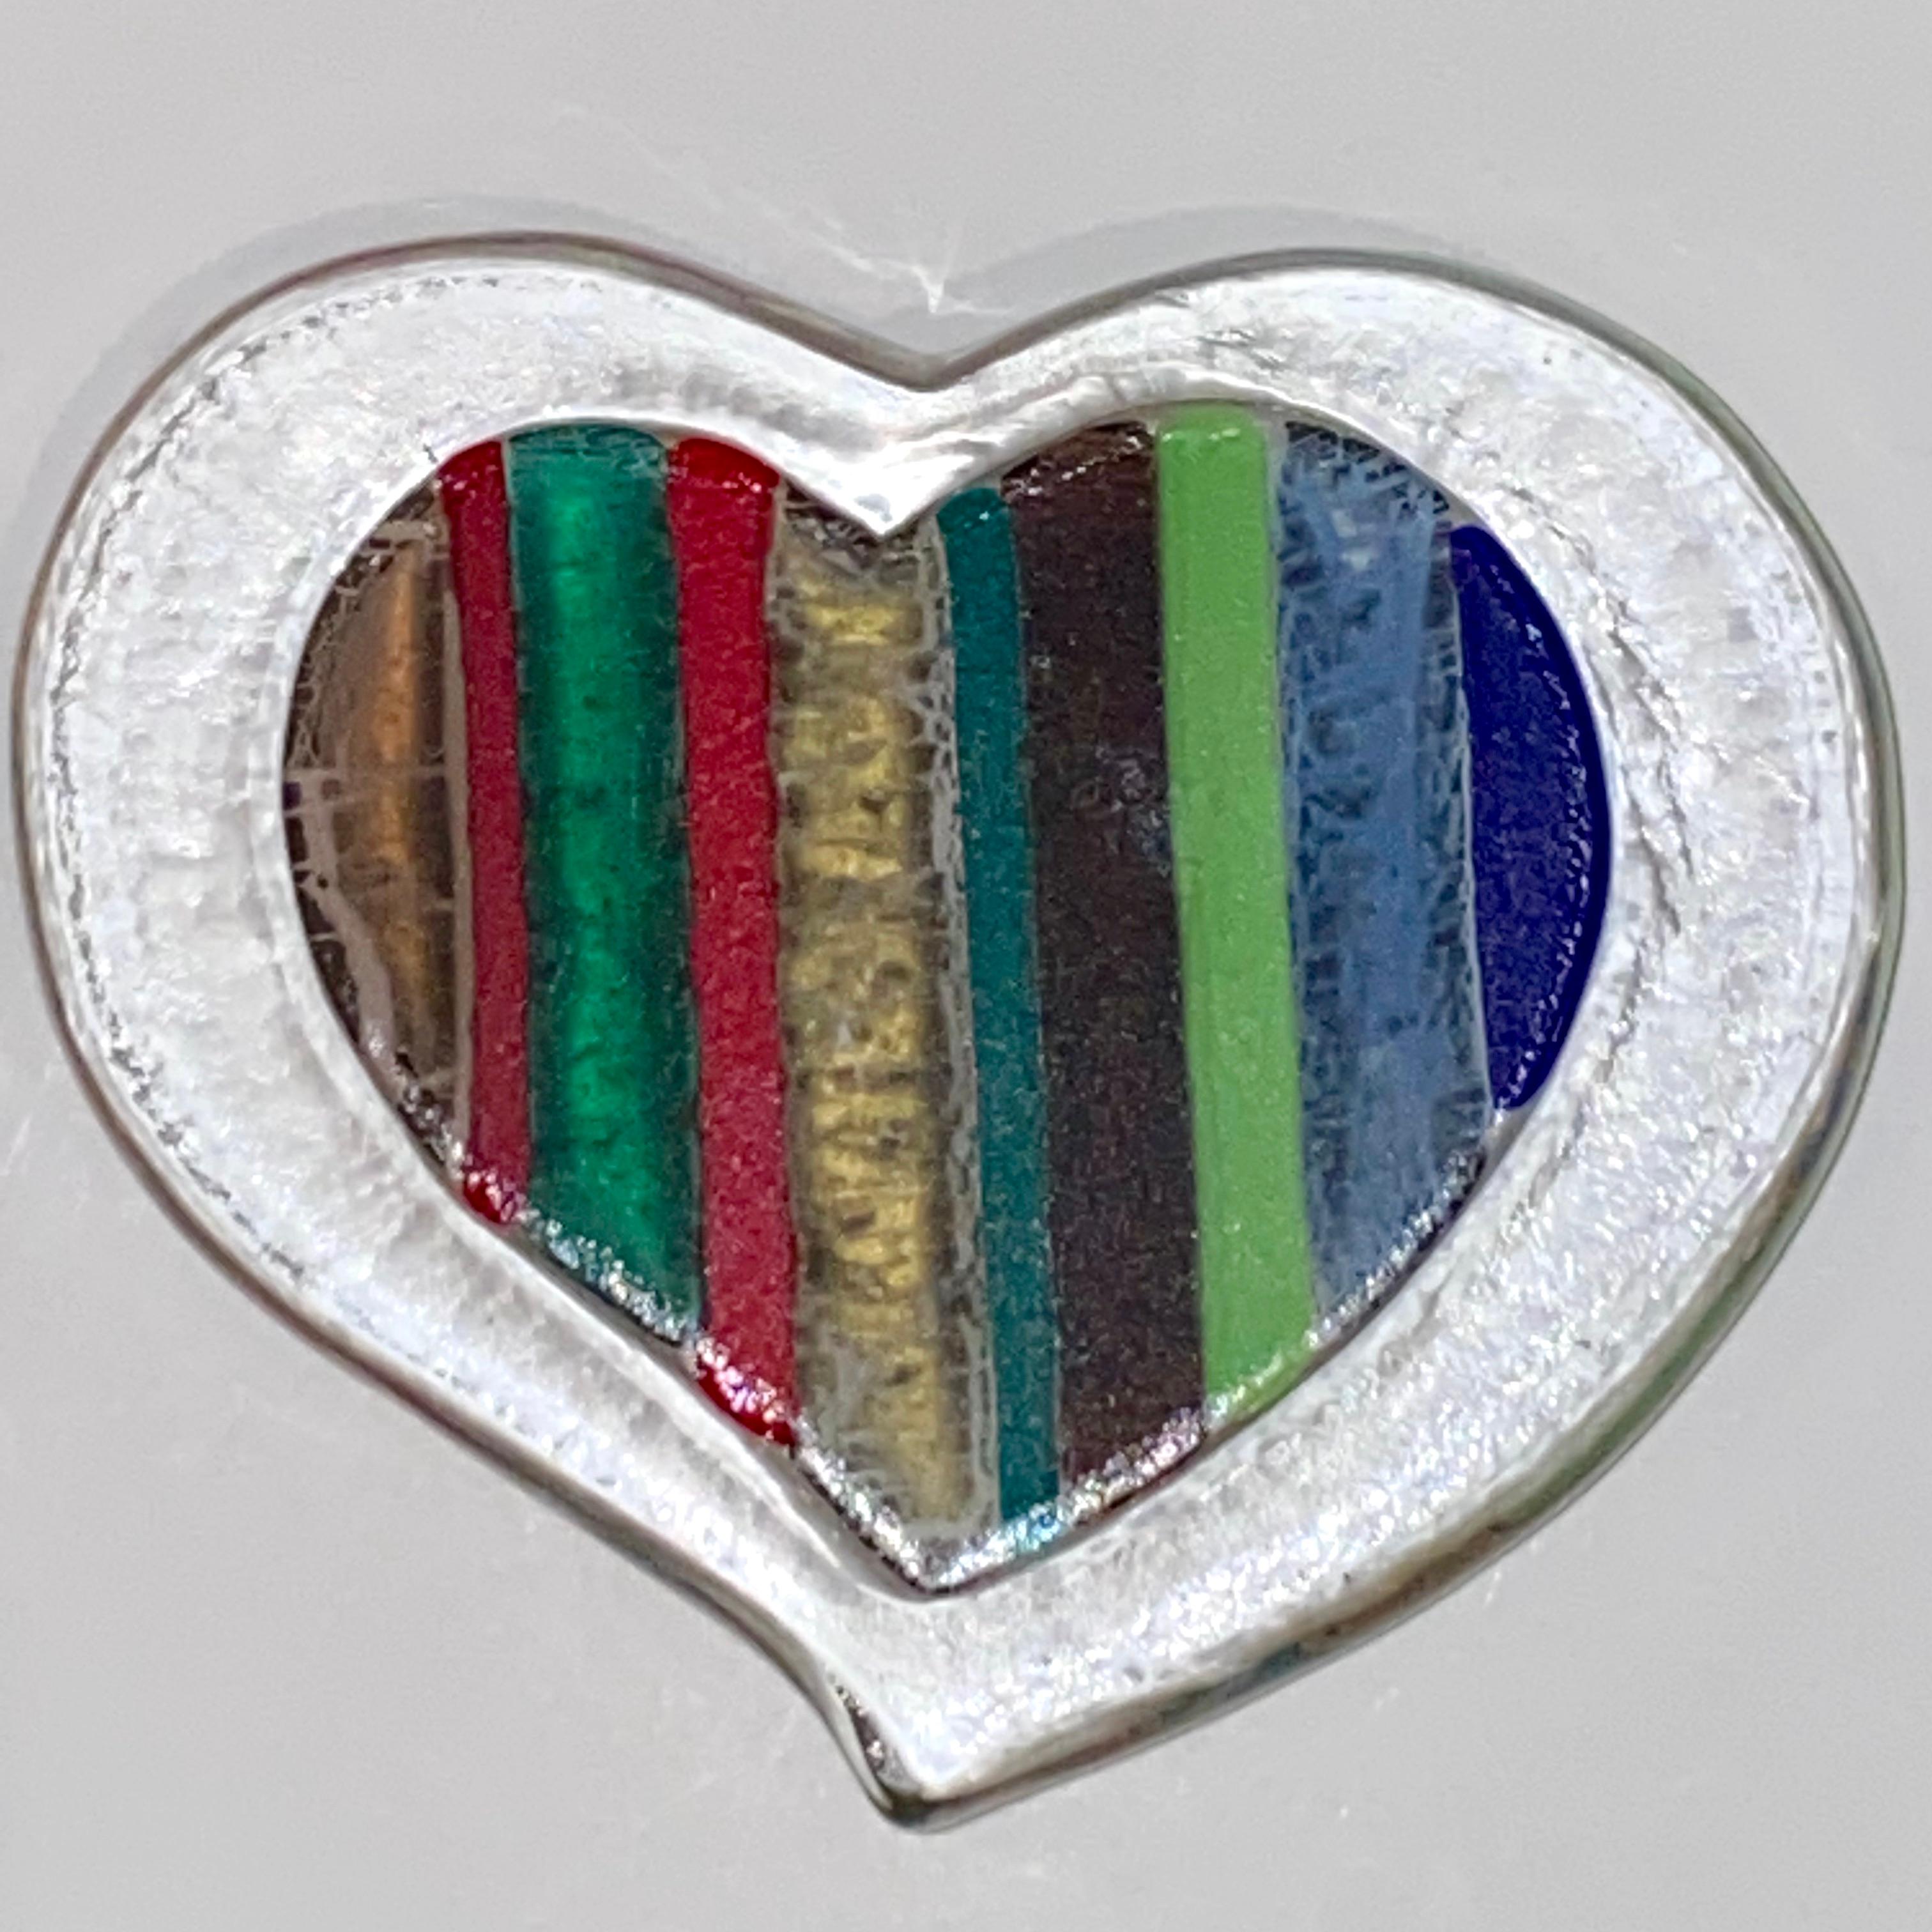 Contemporary Italian organic HEART paperweight with striped post-modern decor, exclusive for Cosulich Interiors & Antiques by Veve Glass, entirely handcrafted in colored Murano glass, royal blue, gold, black, red, dark green, and apple green jade